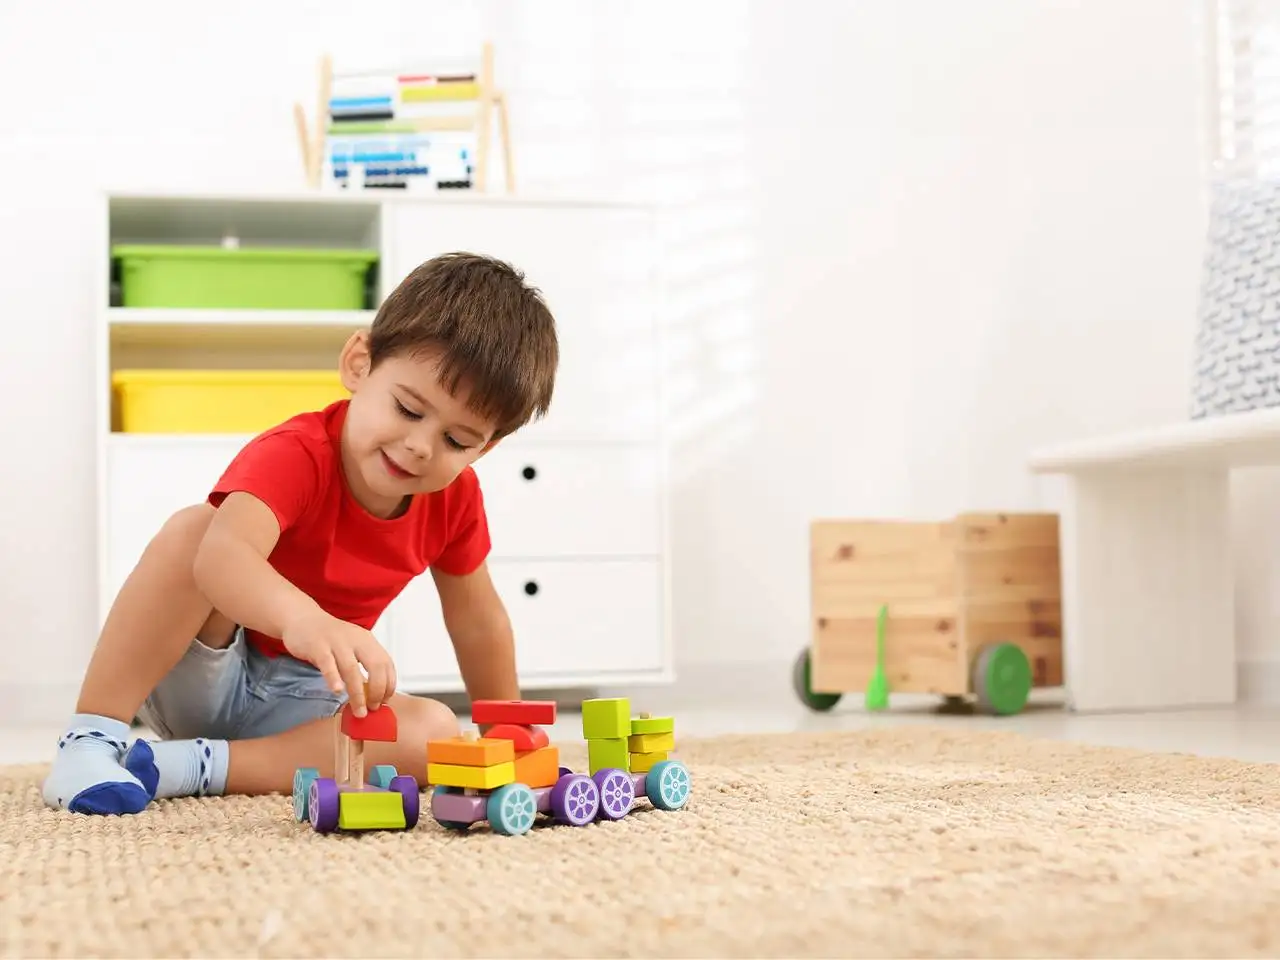 PlanToys personalizes toy recommendations for kids, 43% of orders driven by ConvertWise